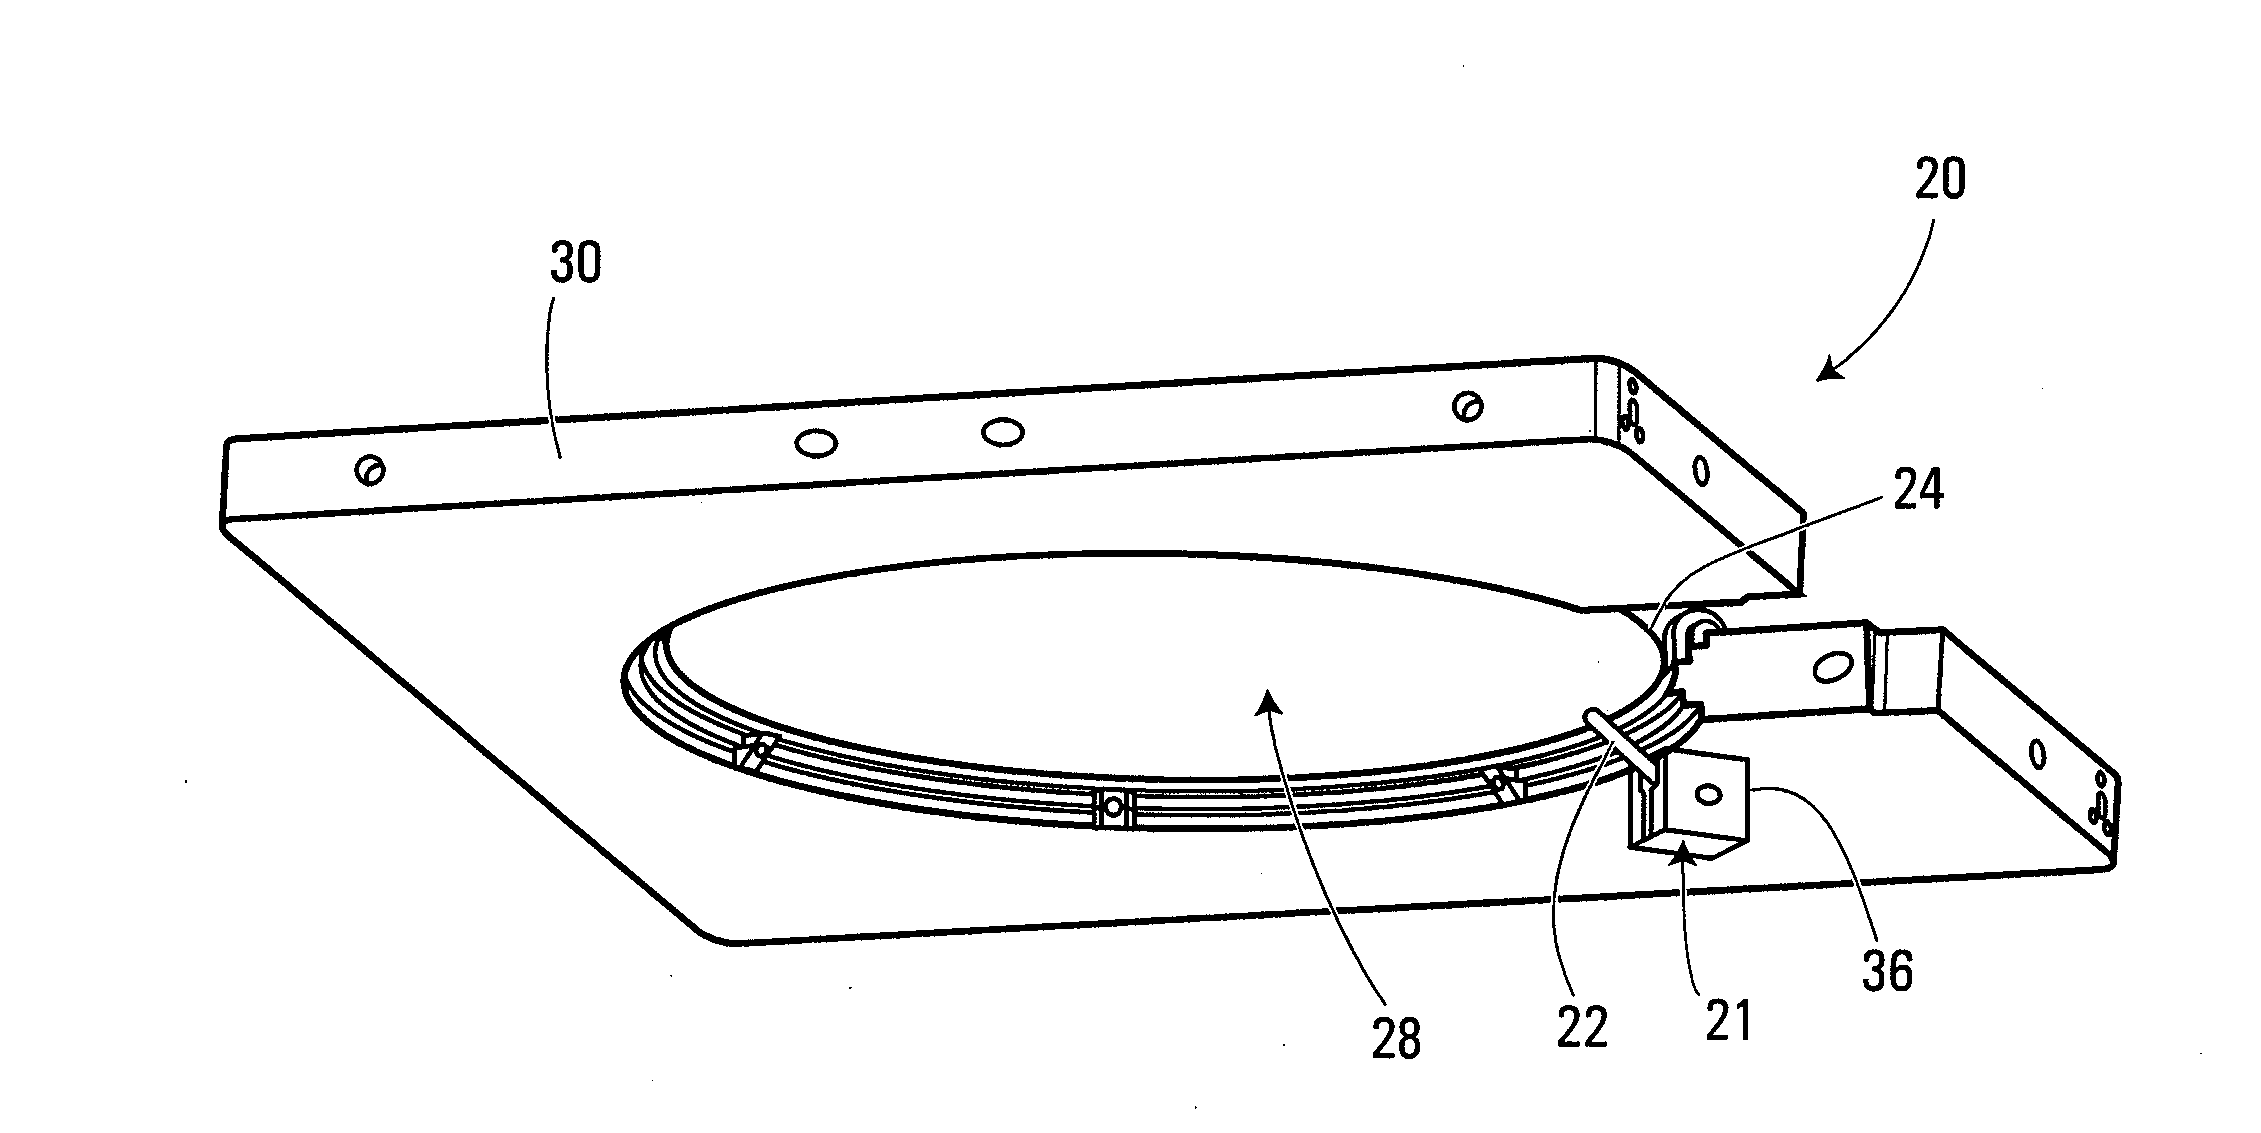 Methods and systems for supporting a workpiece and for heat-treating the workpiece